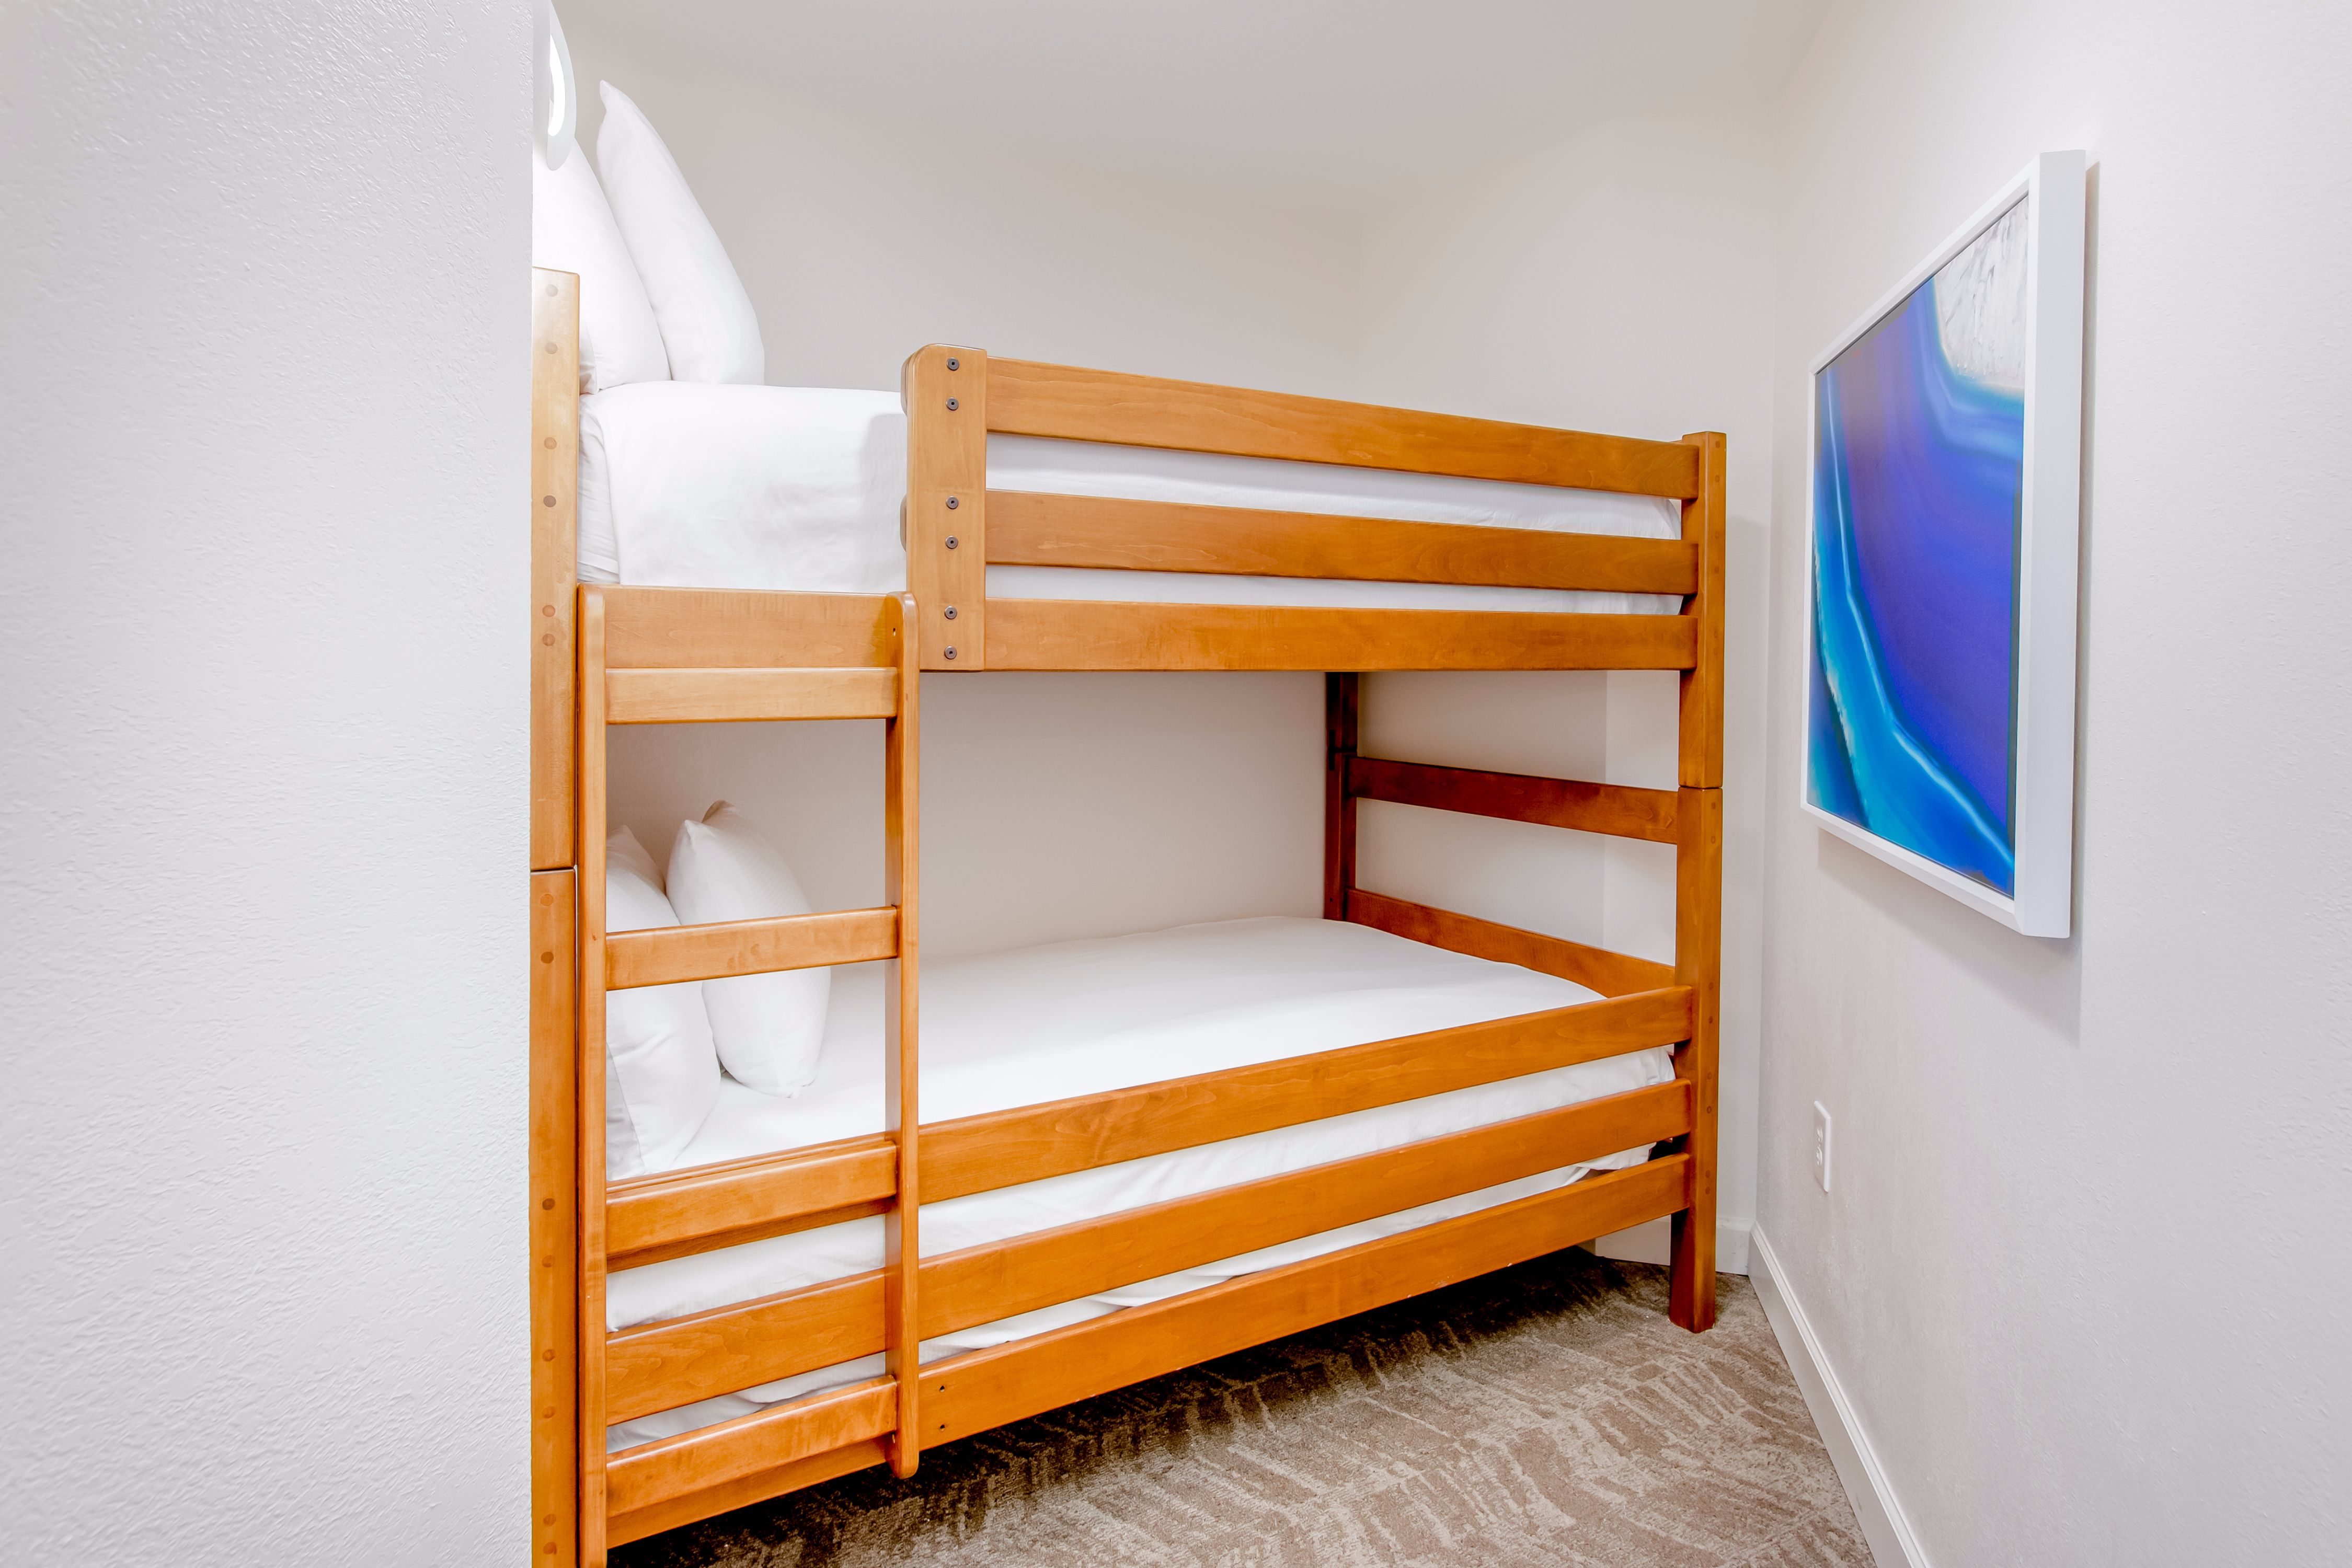 Junior suite with two queen bunk beds and art on the wall